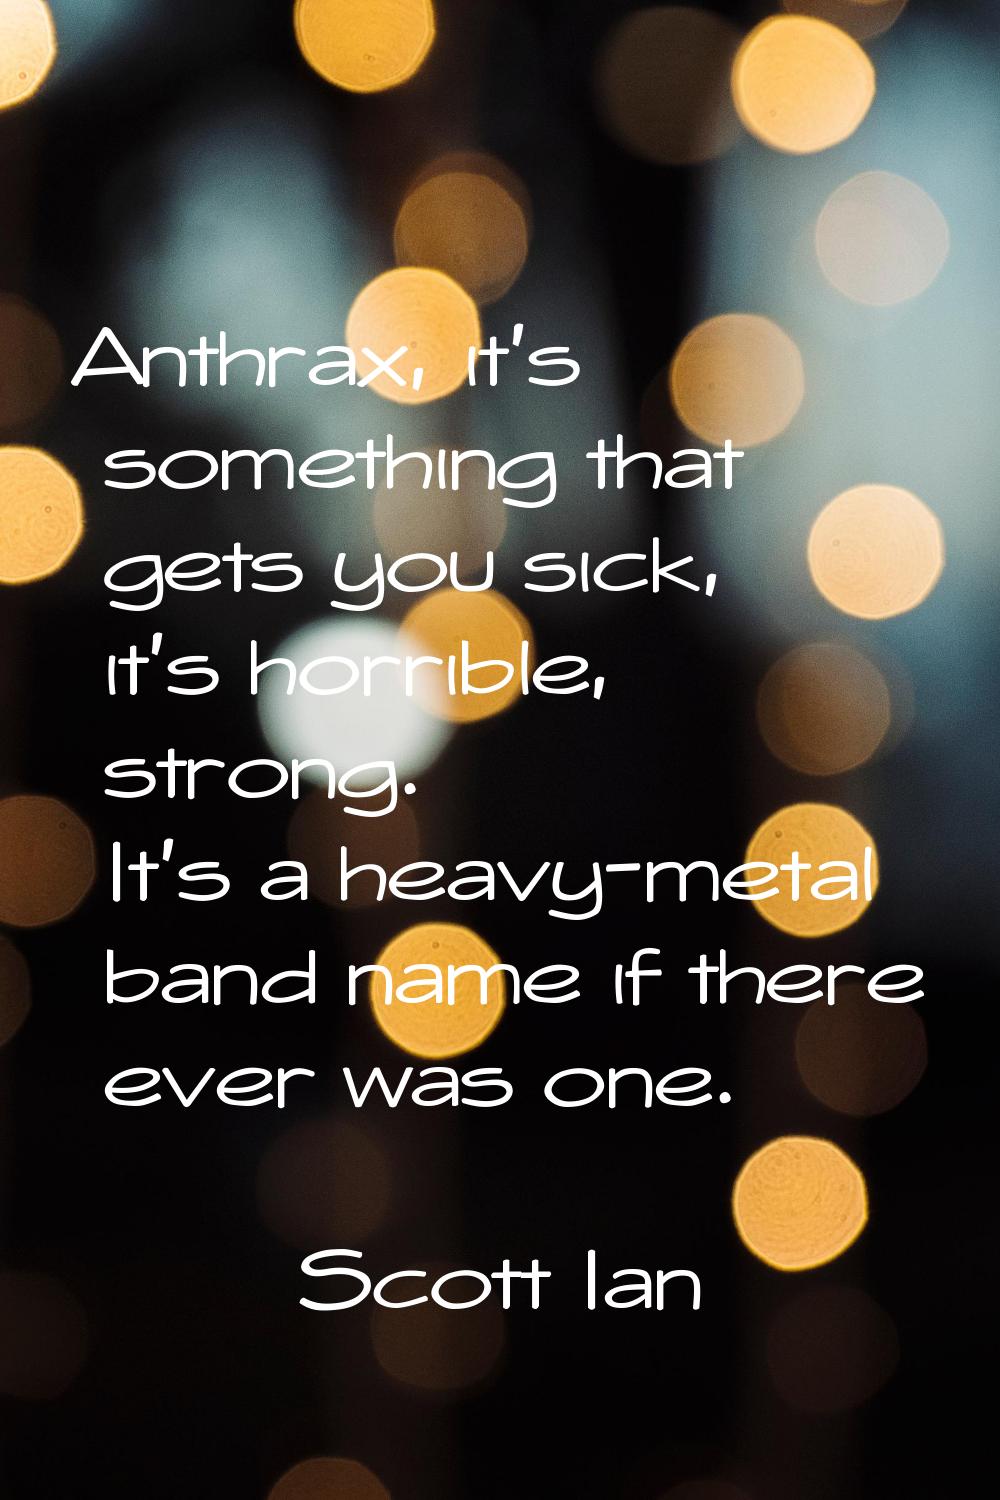 Anthrax, it's something that gets you sick, it's horrible, strong. It's a heavy-metal band name if 